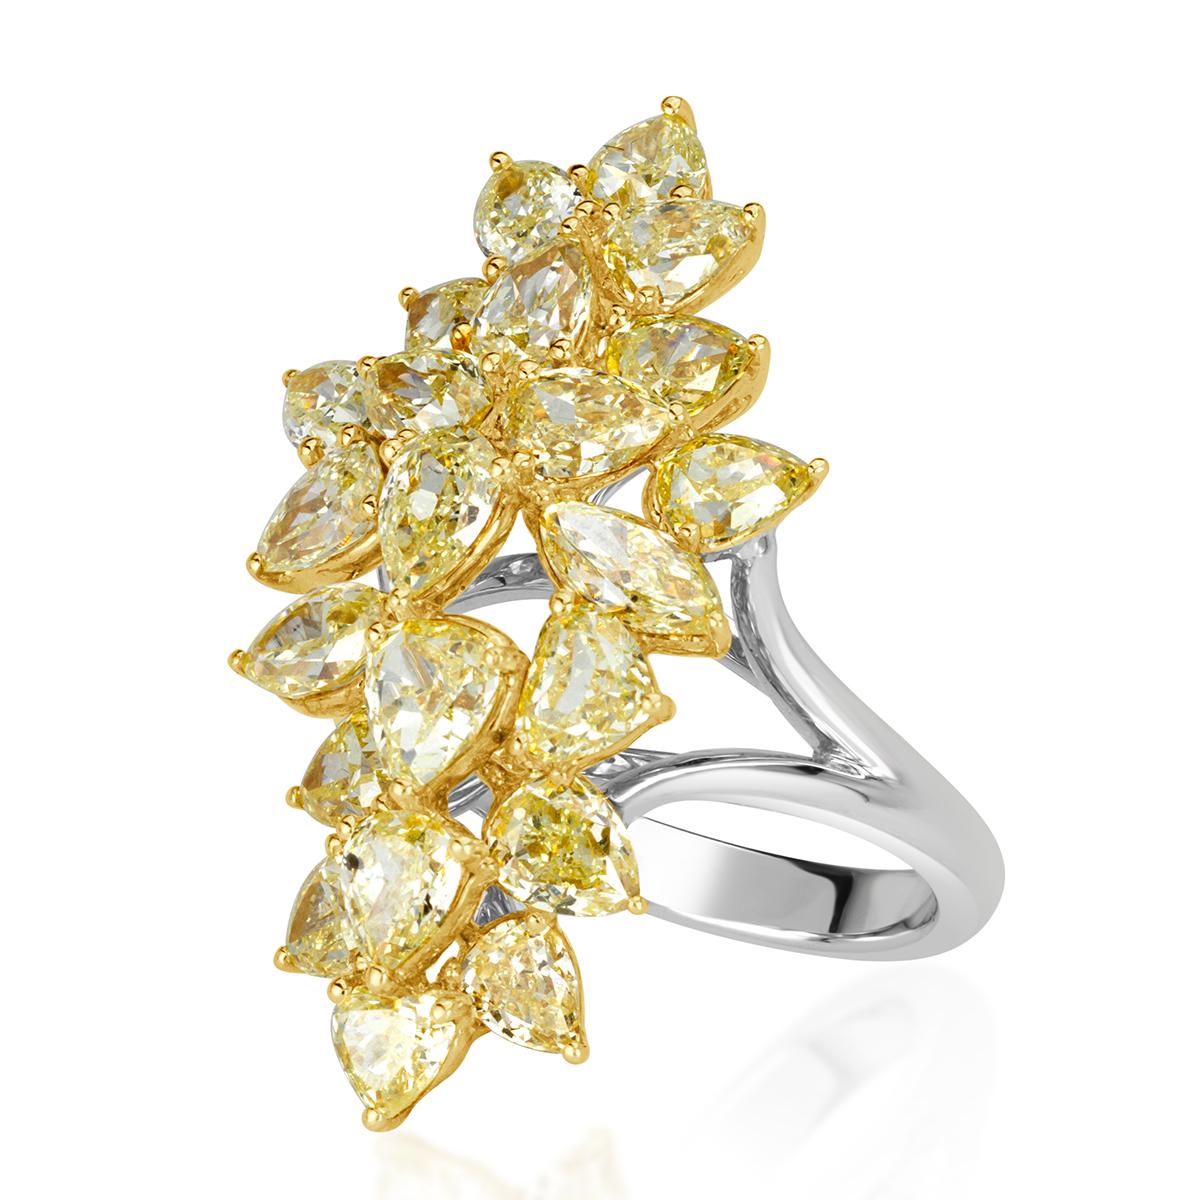 This ravishing two-tone cluster ring showcases 5.59ct of fancy yellow diamonds of various shaped including marquise, pear and heart shaped diamonds. The diamonds are graded at VS1-VS2 in clarity and are set in 18k yellow and white gold.
